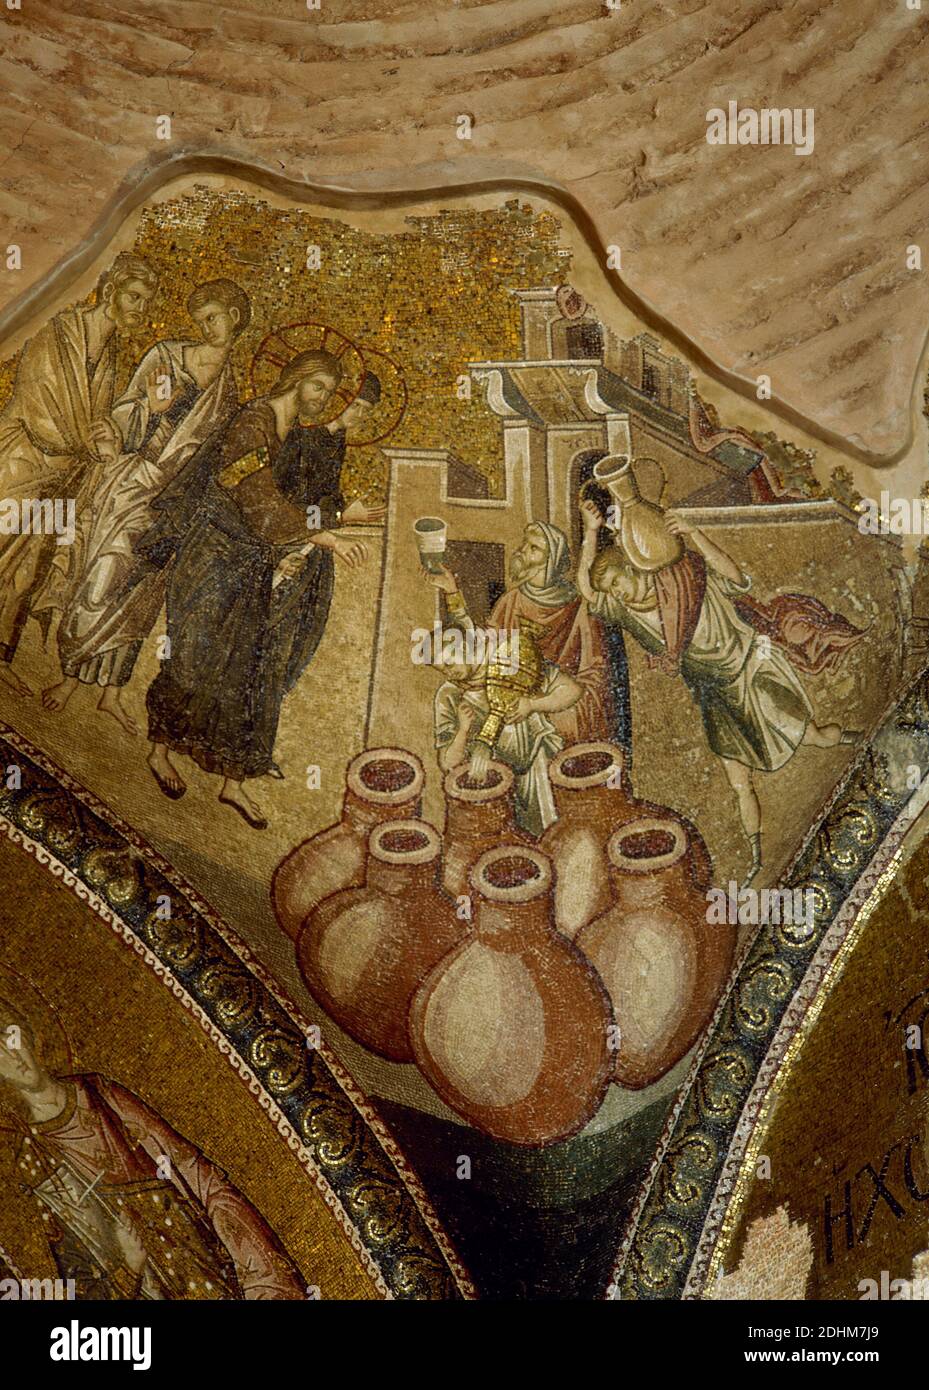 Turkey, Istanbul. Church of the Holy Saviour in Chora. Byzantine style. Outer Narthex Mosaic, 14th century. The wine miracle at Cana.  When the wine was finsihed in the wedding, Christ told the servants to fill the amphoras with water which later turned to wine. Stock Photo